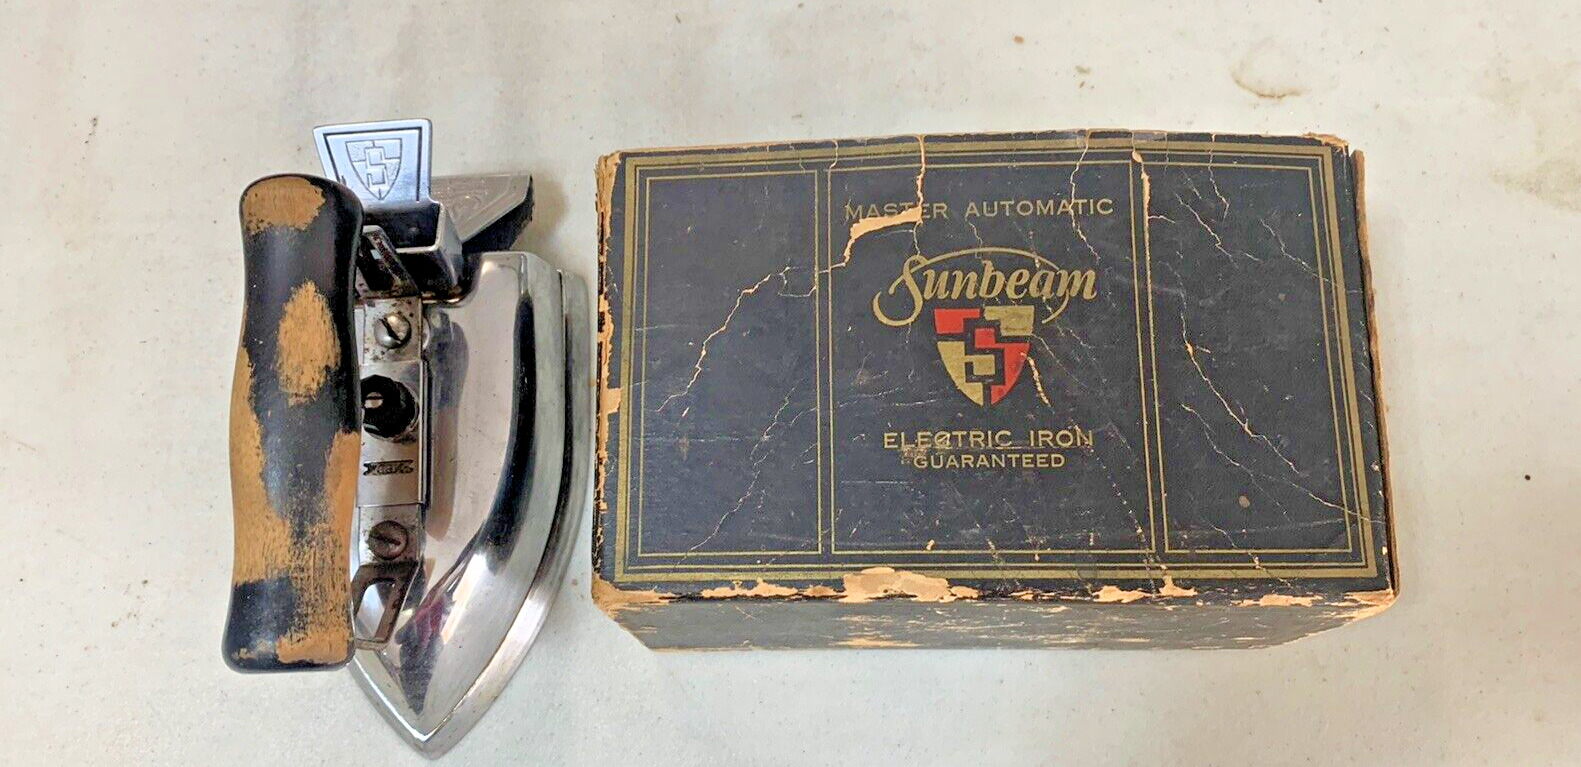 Vintage sunbeam master automatic electric iron No.870 (1950\'s)